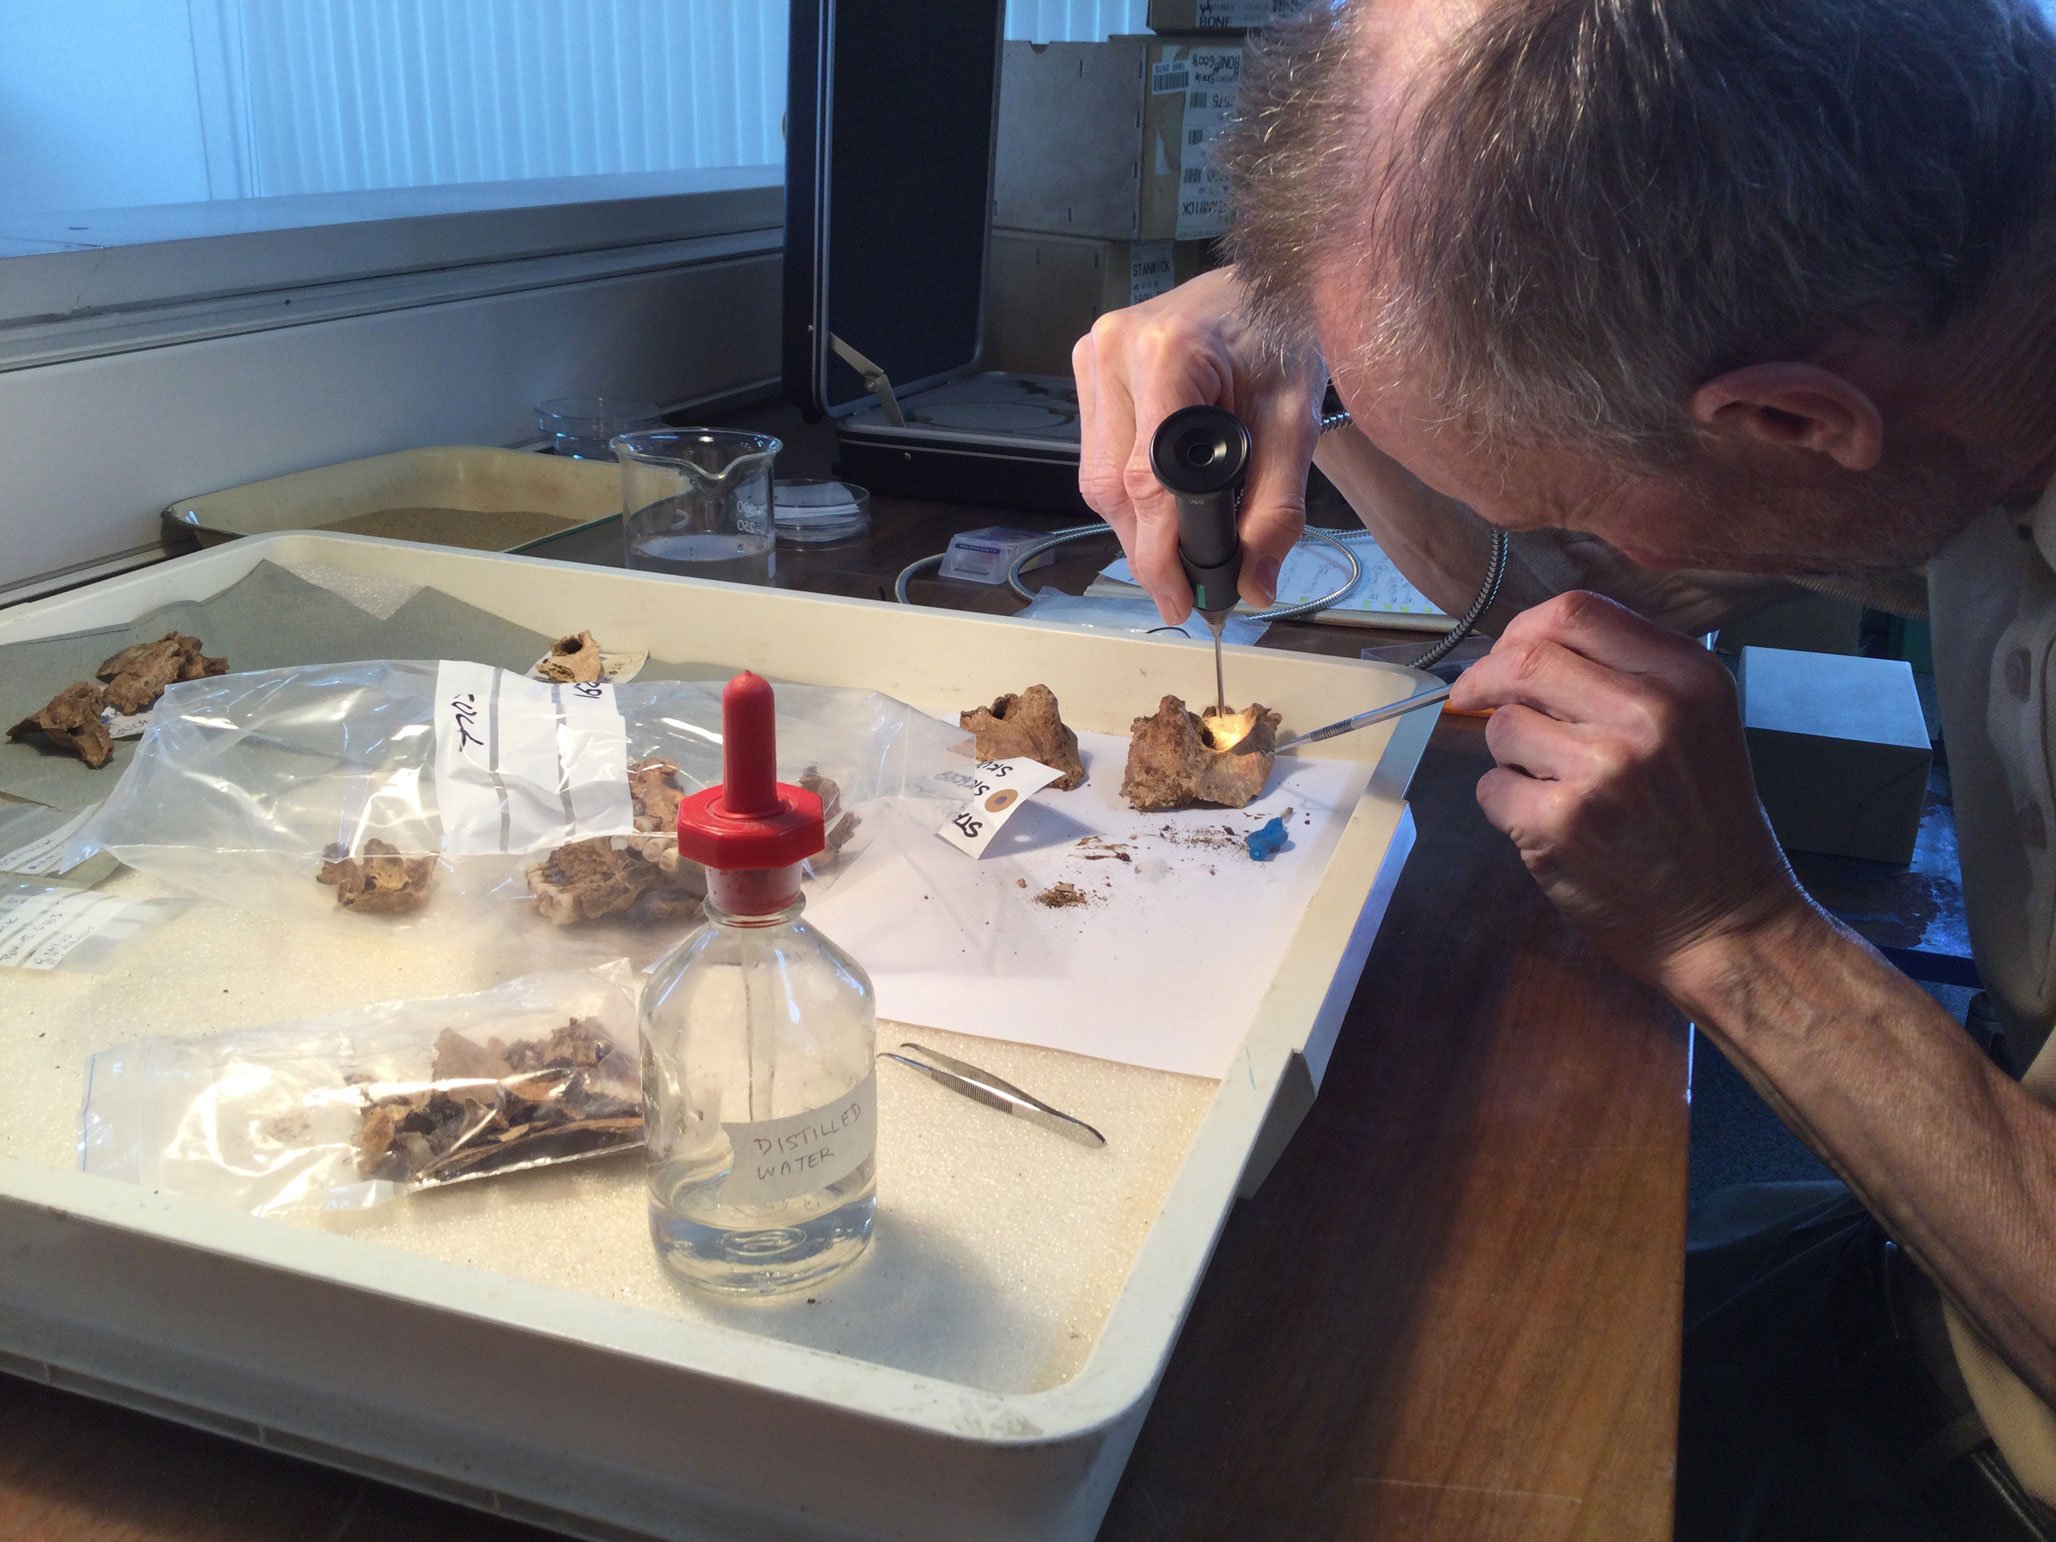 A scientist working with very small bones